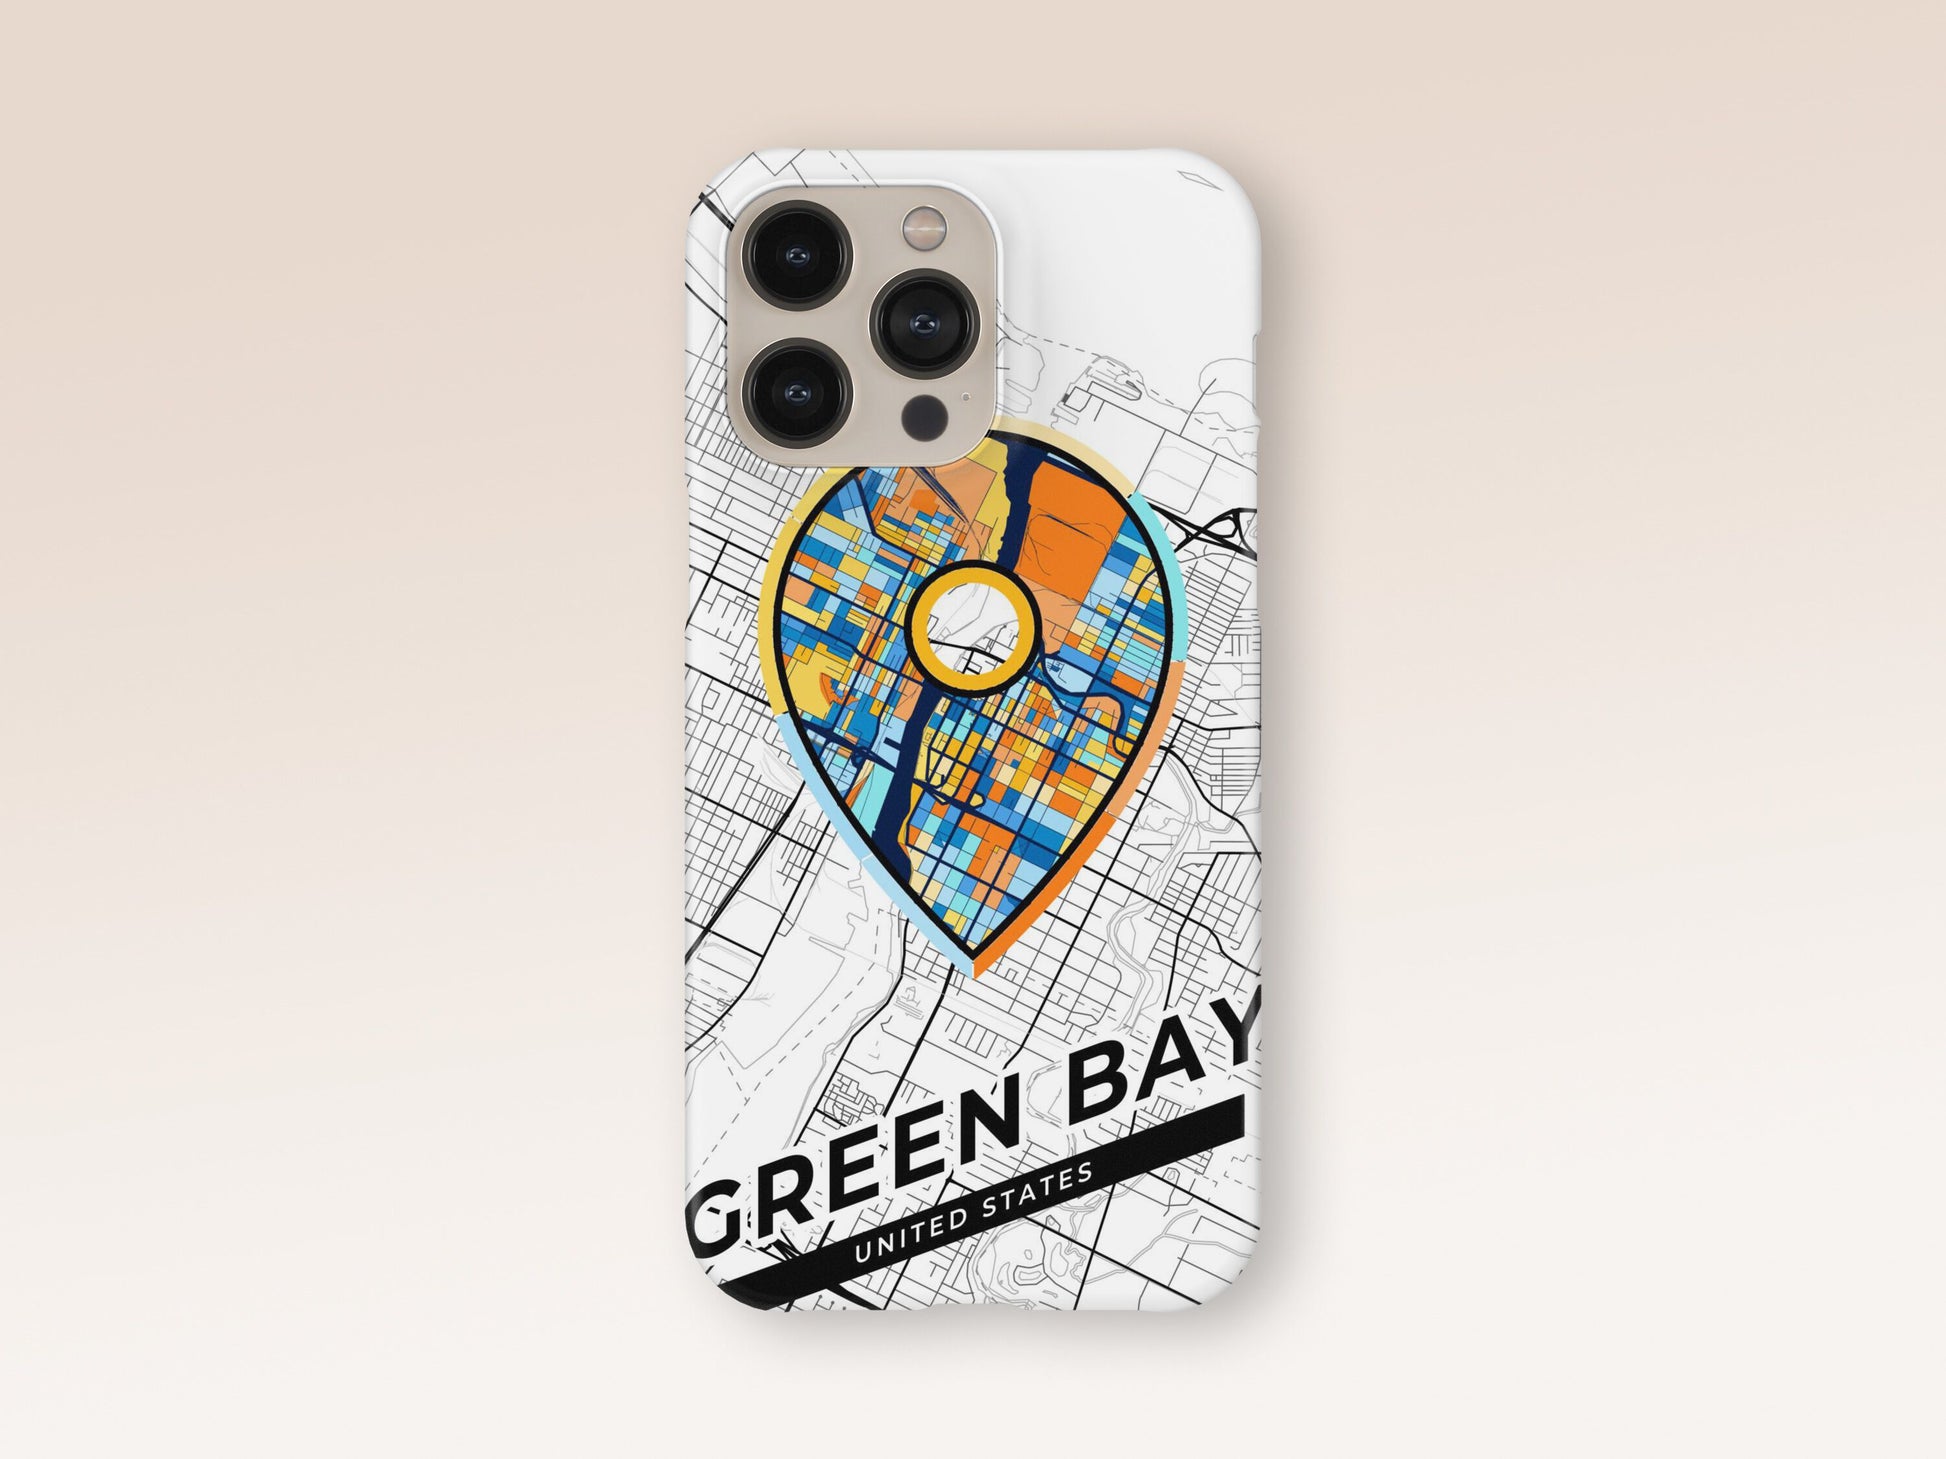 Green Bay Wisconsin slim phone case with colorful icon. Birthday, wedding or housewarming gift. Couple match cases. 1